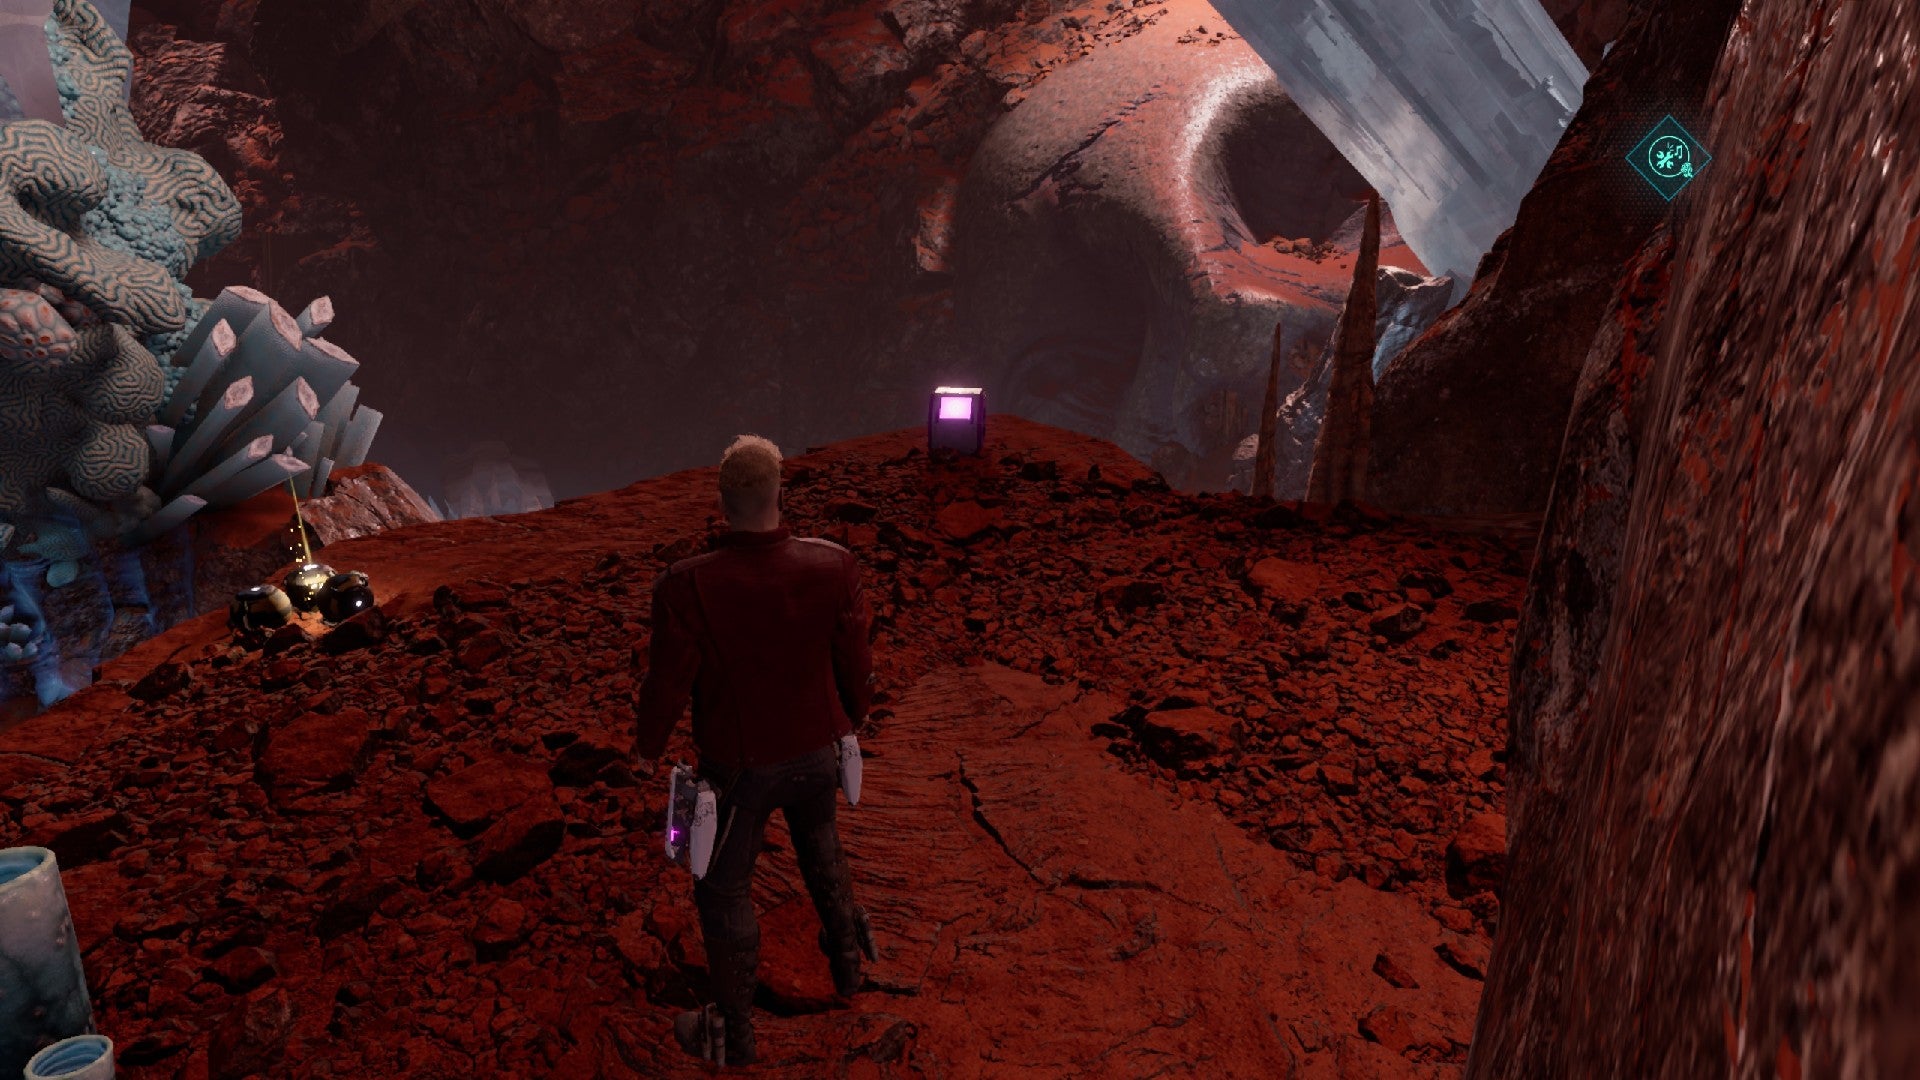 Star-Lord stood on cliff with outfit box and components nearby